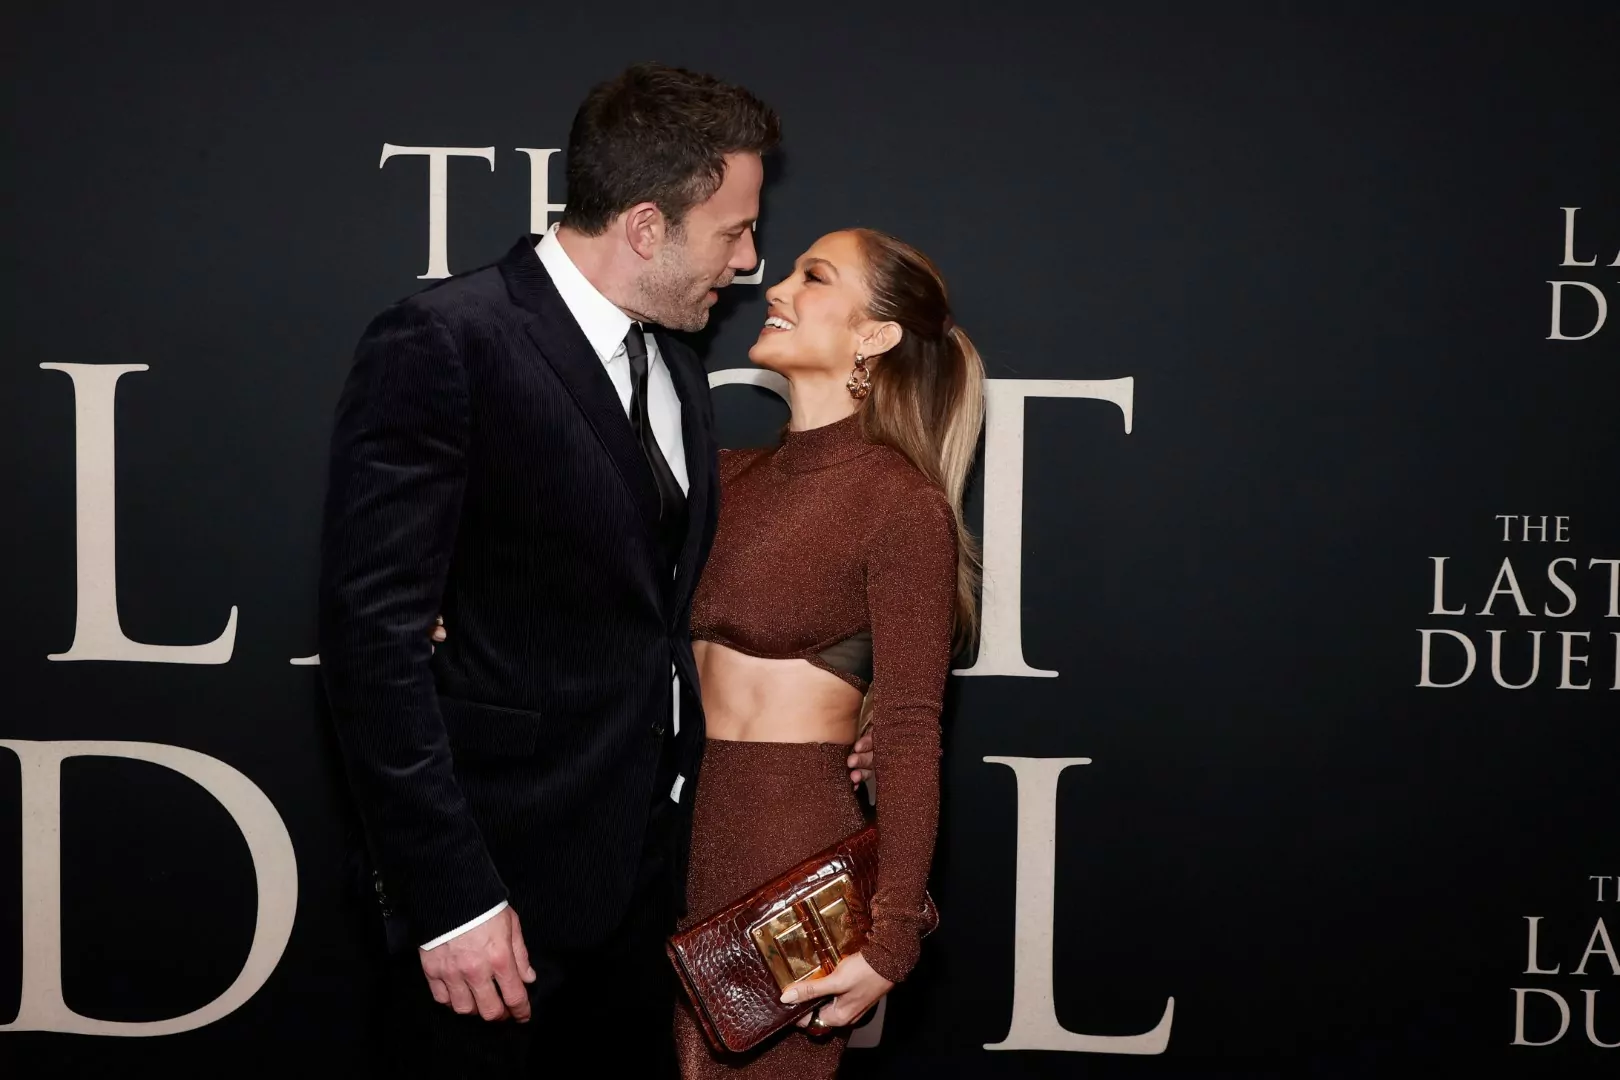 NEW YORK, NEW YORK - OCTOBER 09: Ben Affleck and Jennifer Lopez attend "The Last Duel" New York Premiere at Rose Theater at Jazz at Lincoln Center's Frederick P. Rose Hall on October 09, 2021 in New York City. (Photo by Arturo Holmes/Getty Images)